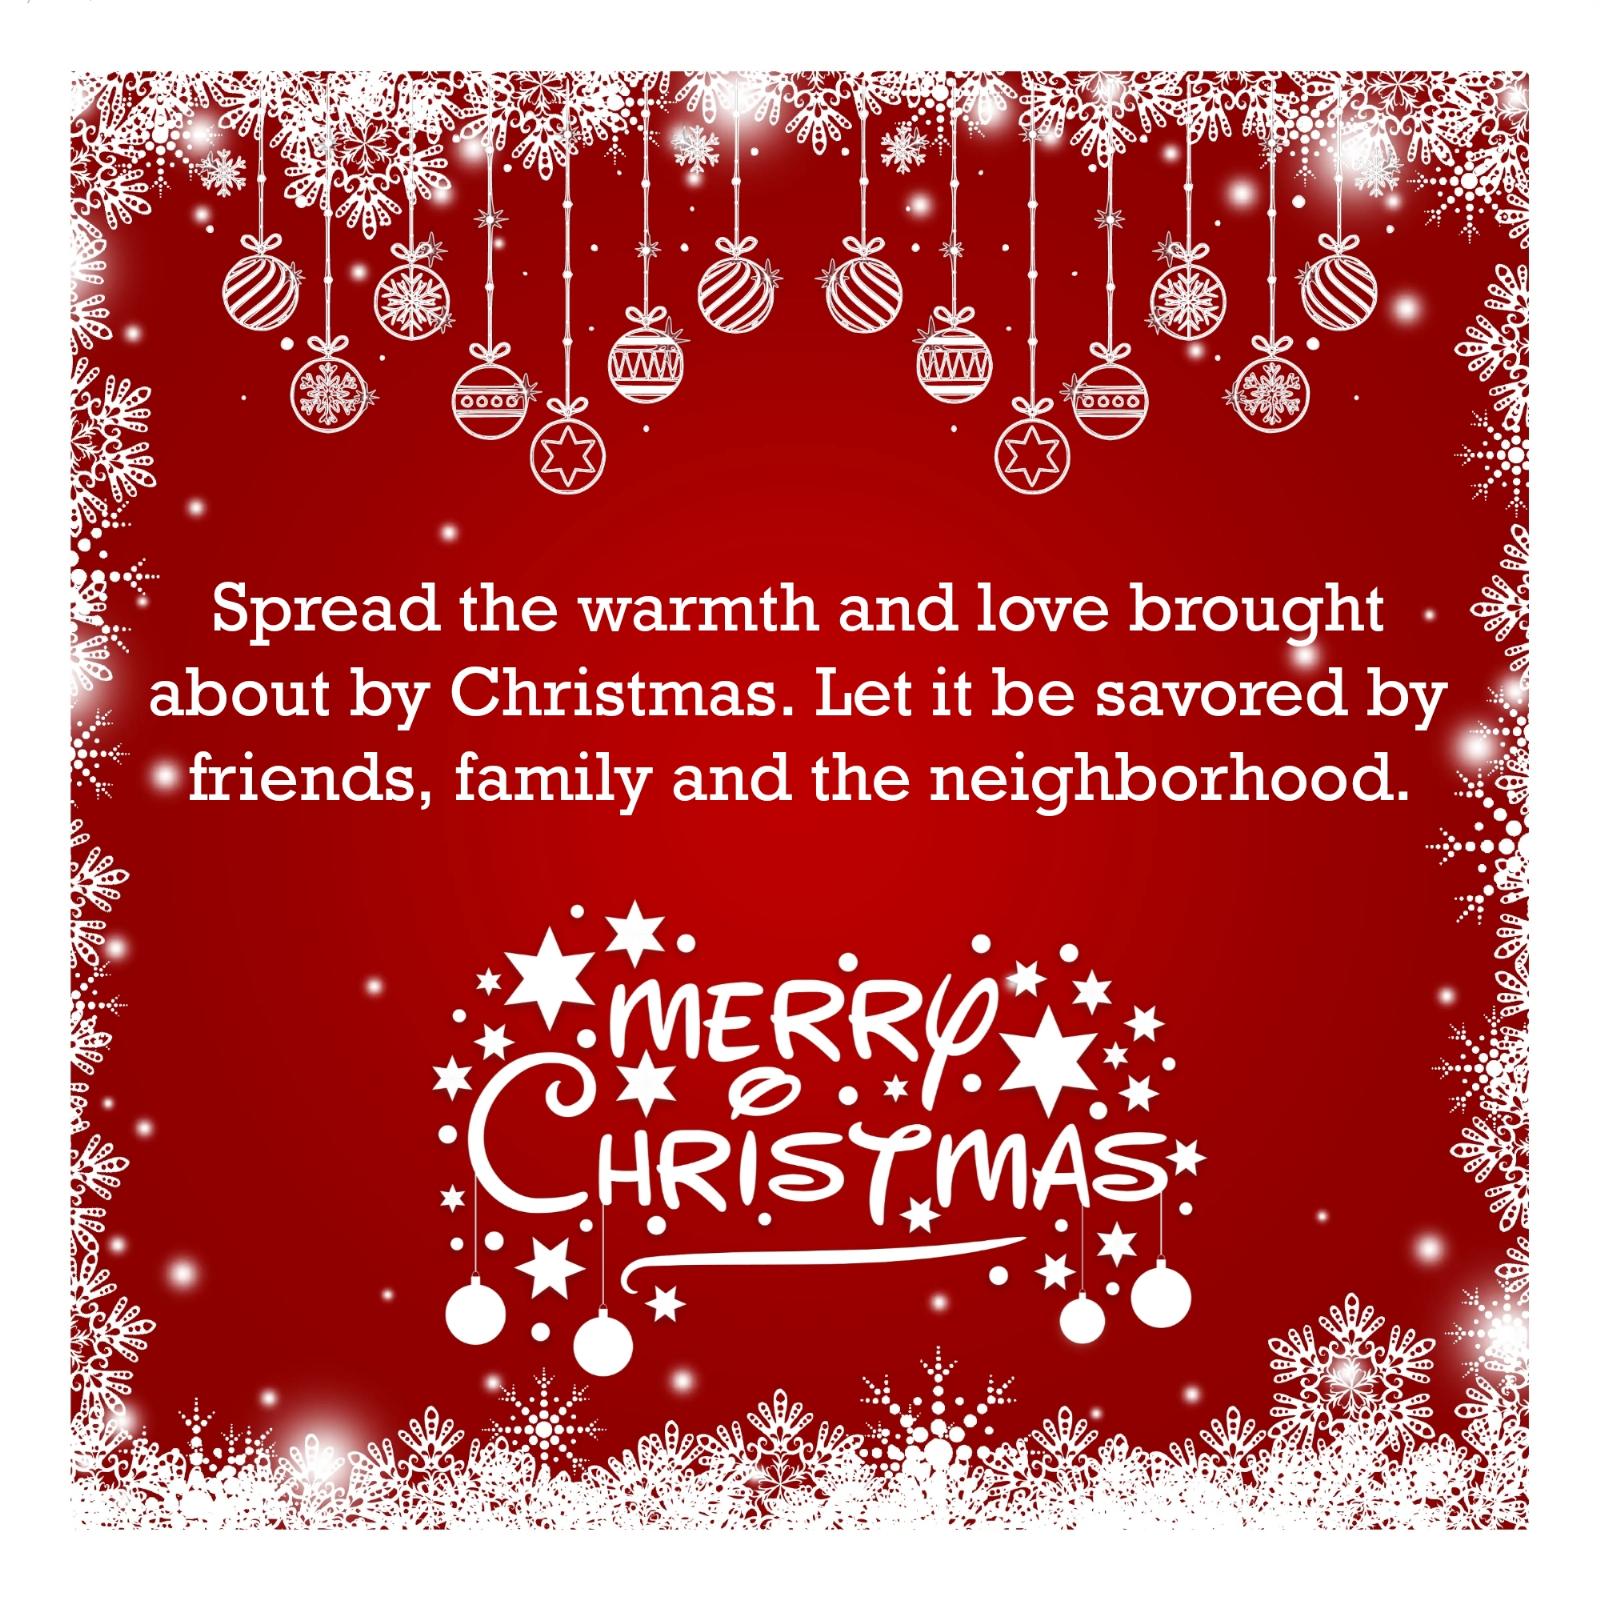 Spread the warmth and love brought about by Christmas